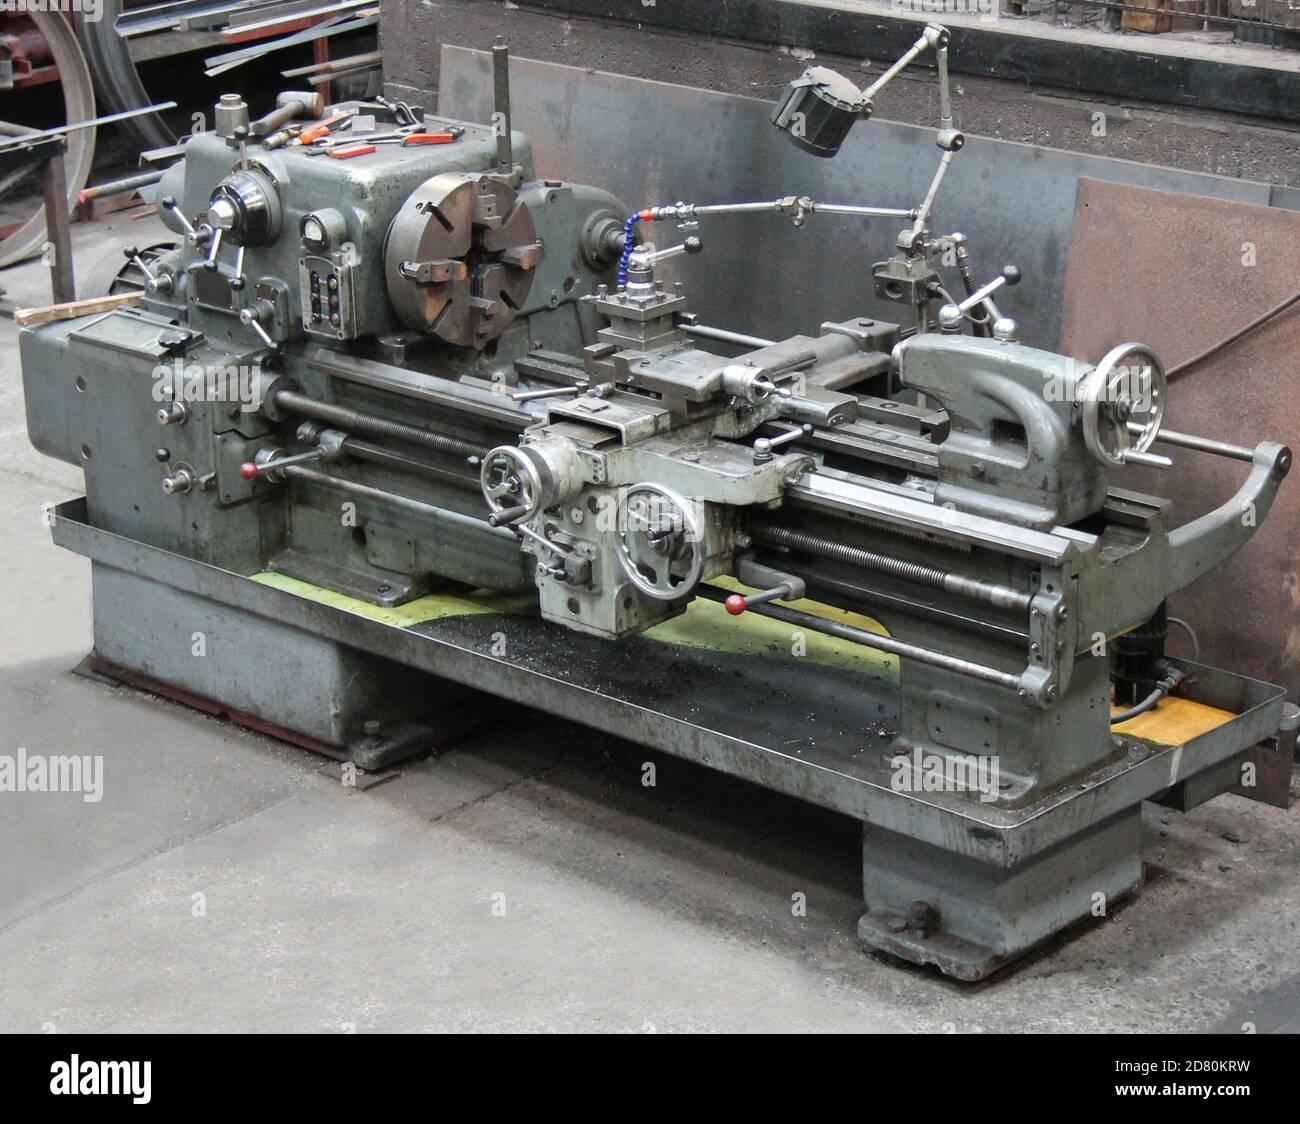 A Large Heavy Duty Engineering Metal Working Lathe. Stock Photo